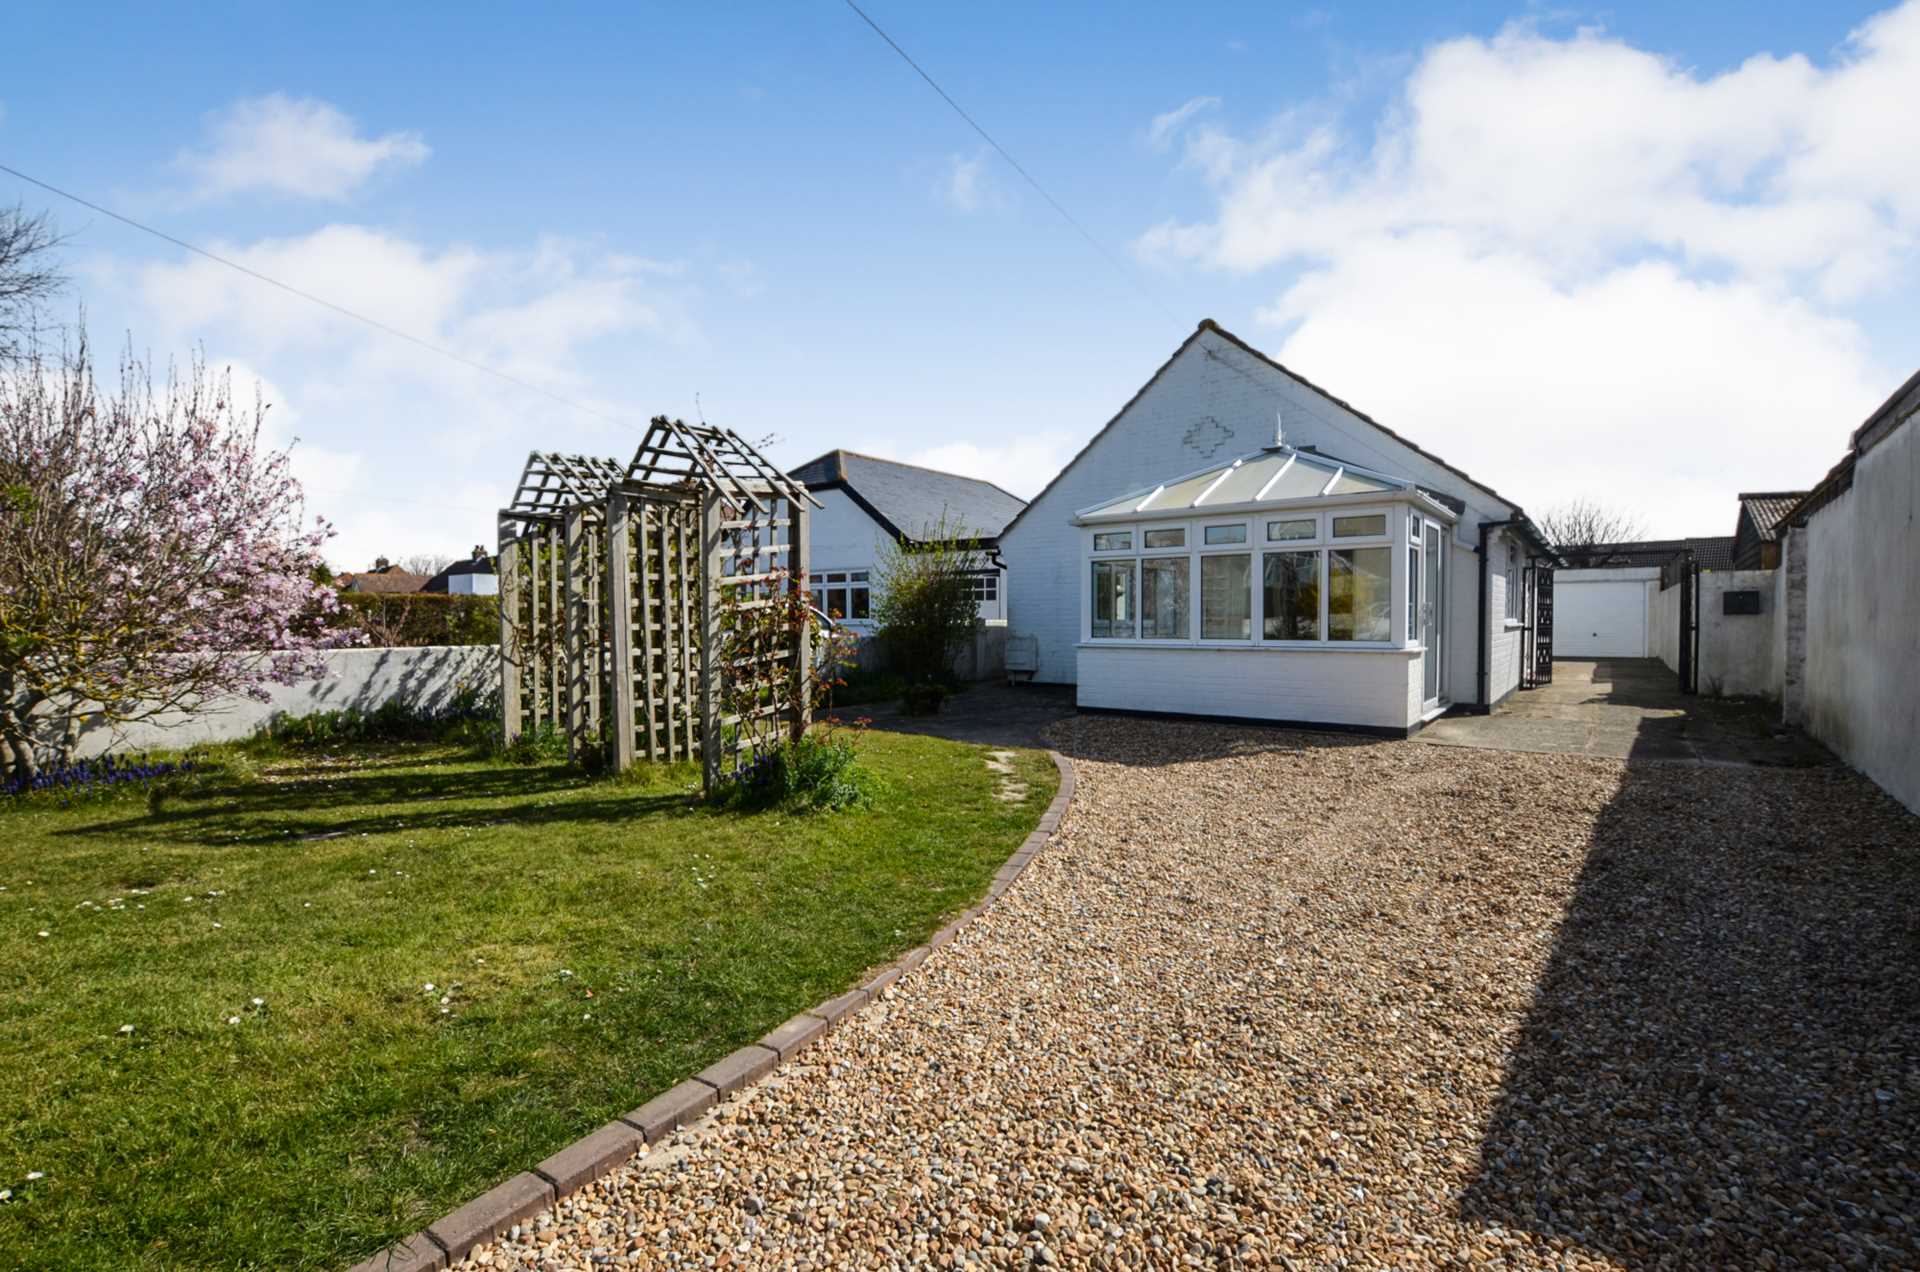 Little Rumford, Russell Road, West Wittering, PO20 8EF, Image 1